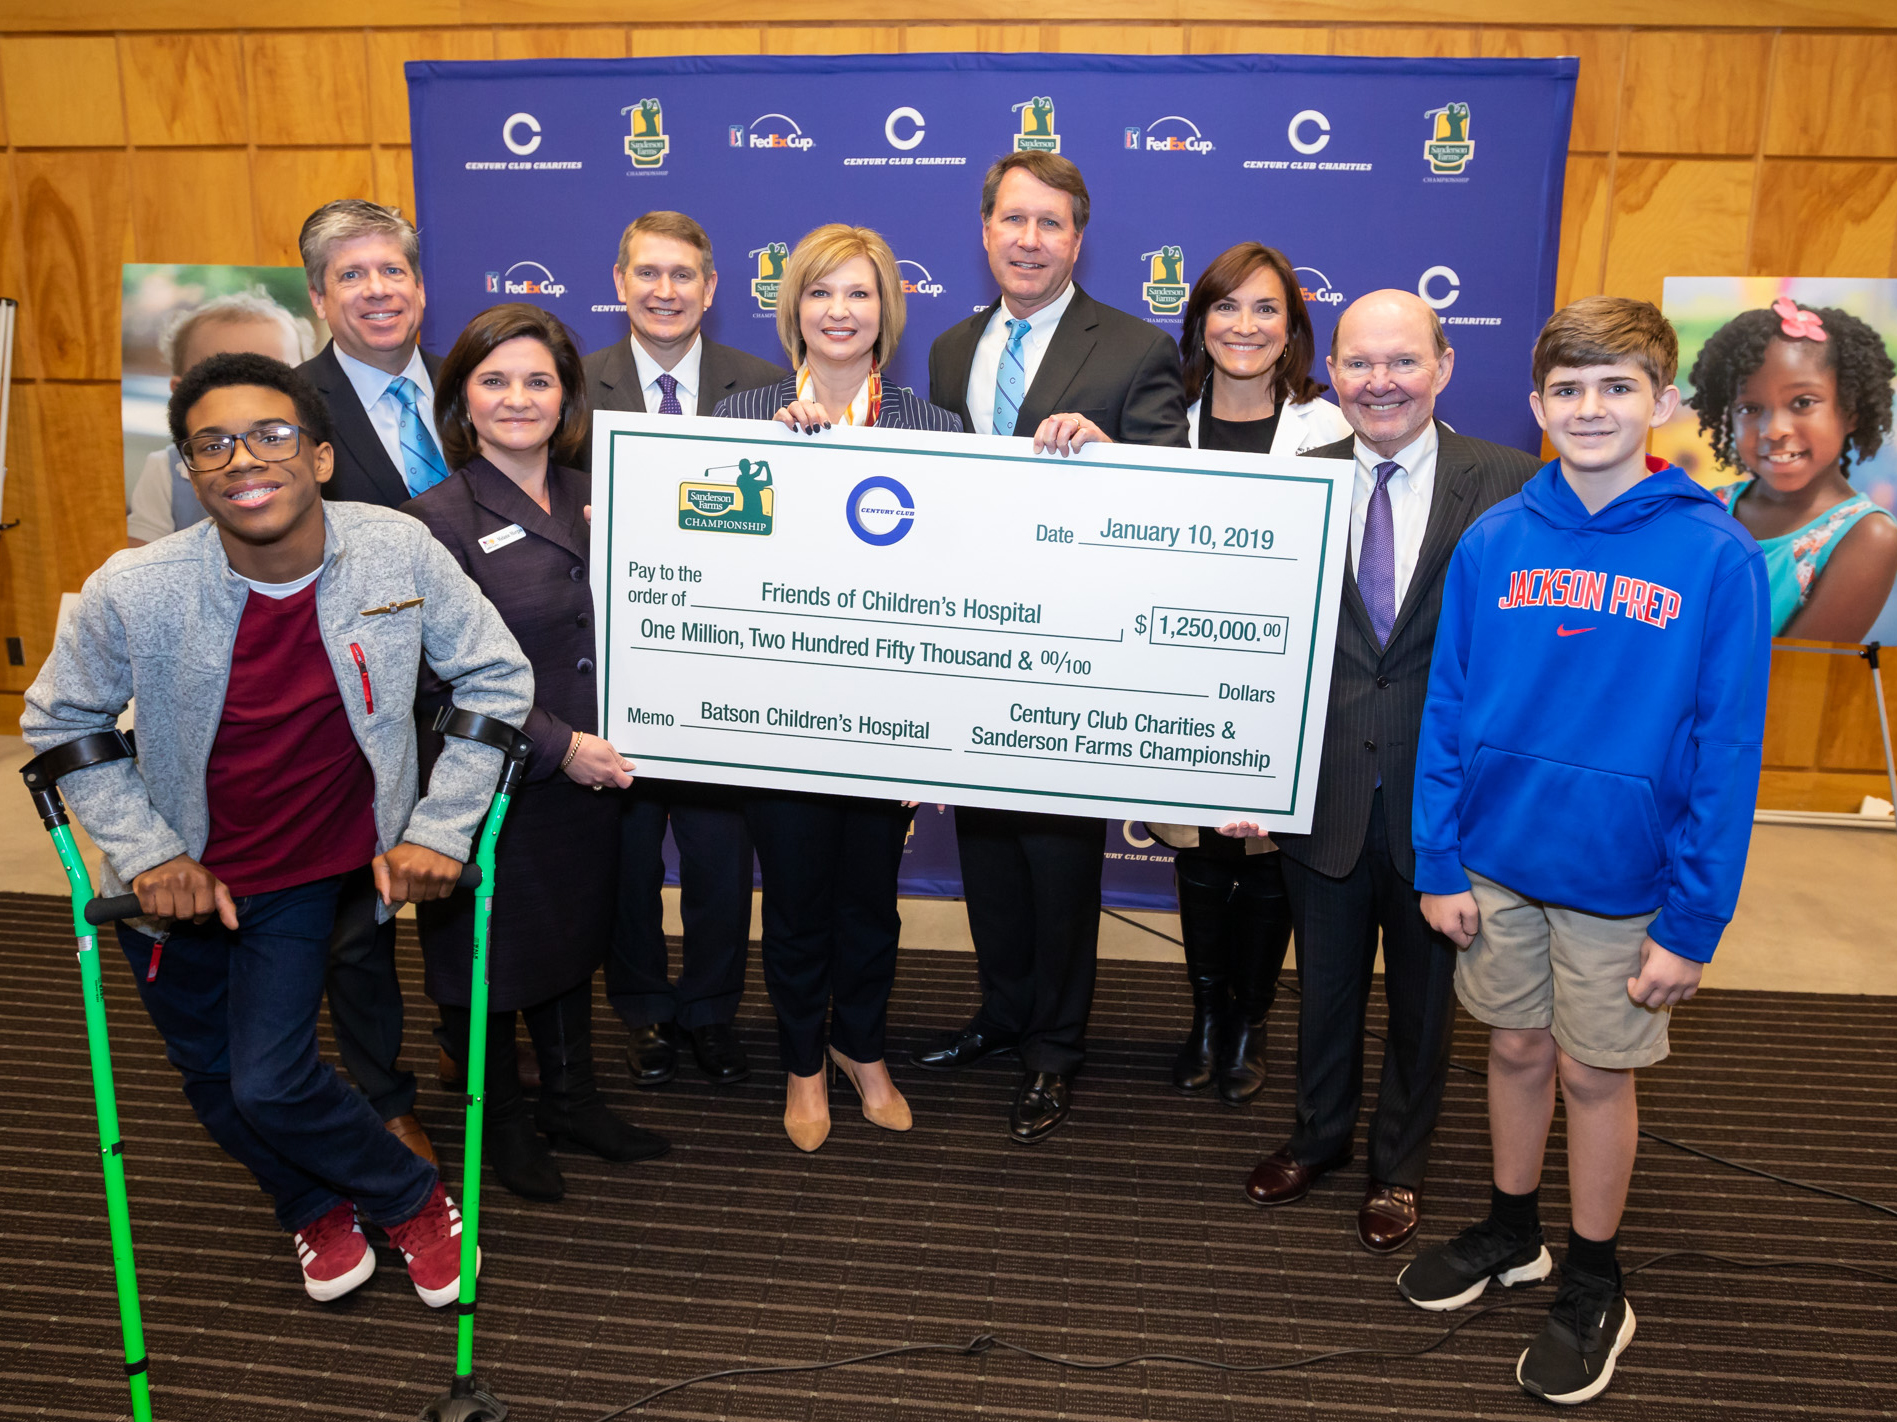 Celebrating a $1.25 million donation from Century Club Charities are, from left, Children's of Mississippi patient Jordan Morgan, Steve Jent, Melanie Morgan, Guy Giesecke, Dr. LouAnn Woodward, Jeff Hubbard, Dr. Mary Taylor, Sanderson Farms CEO and board chair Joe Sanderson Jr. and patient Felton Walker.